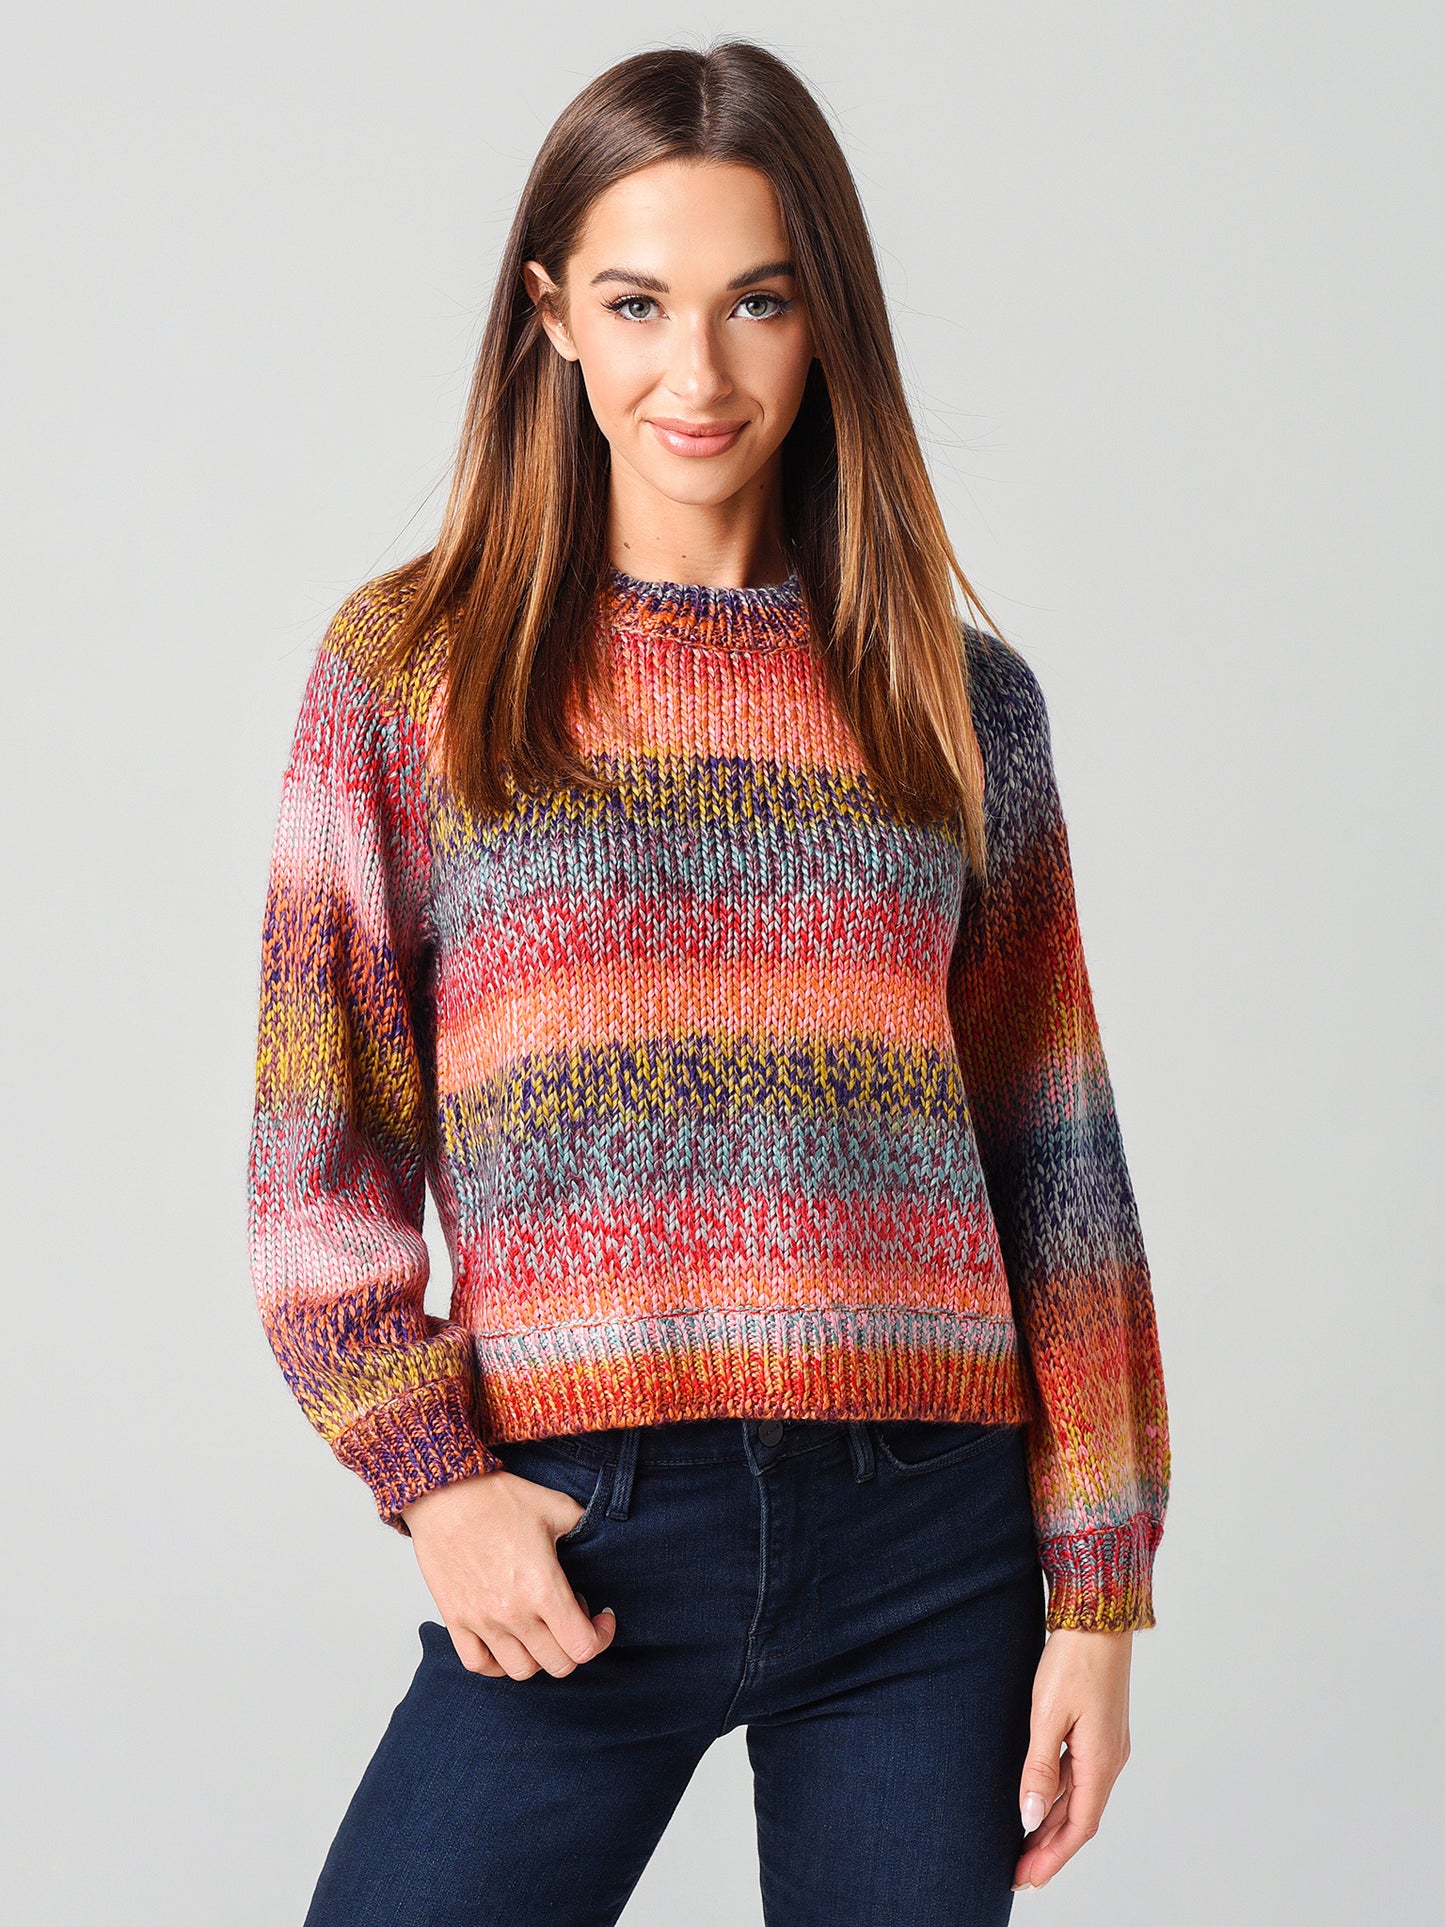 Cupcakes And Cashmere Women's Jupiter Sweater